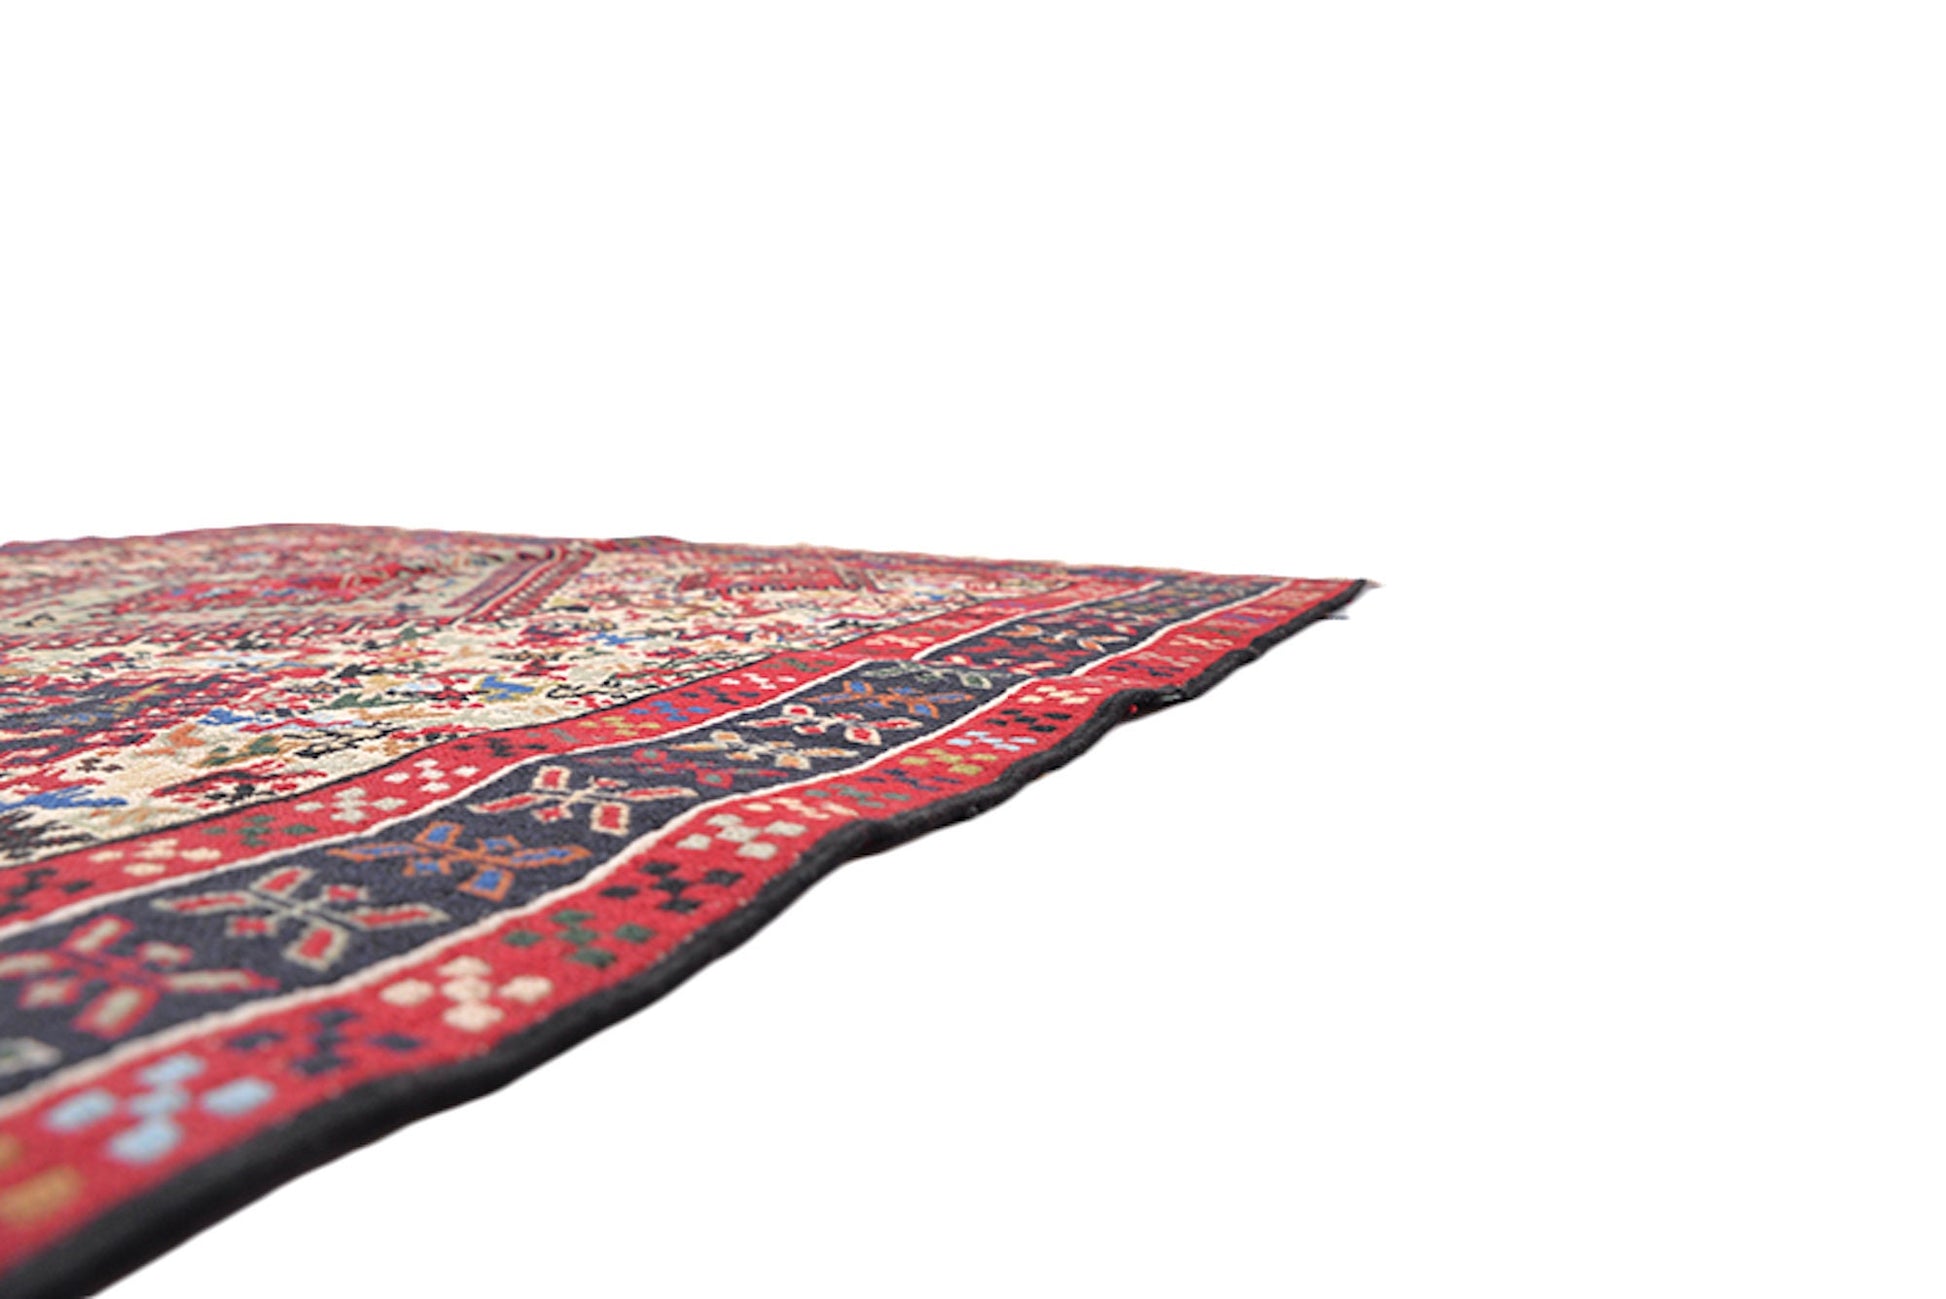 4 x 6 Kilim Flatweave Vintage Area Rug | Turkish Colorful Hand Woven Area Rug with Diamond Pattern and Bright Red Accent Color